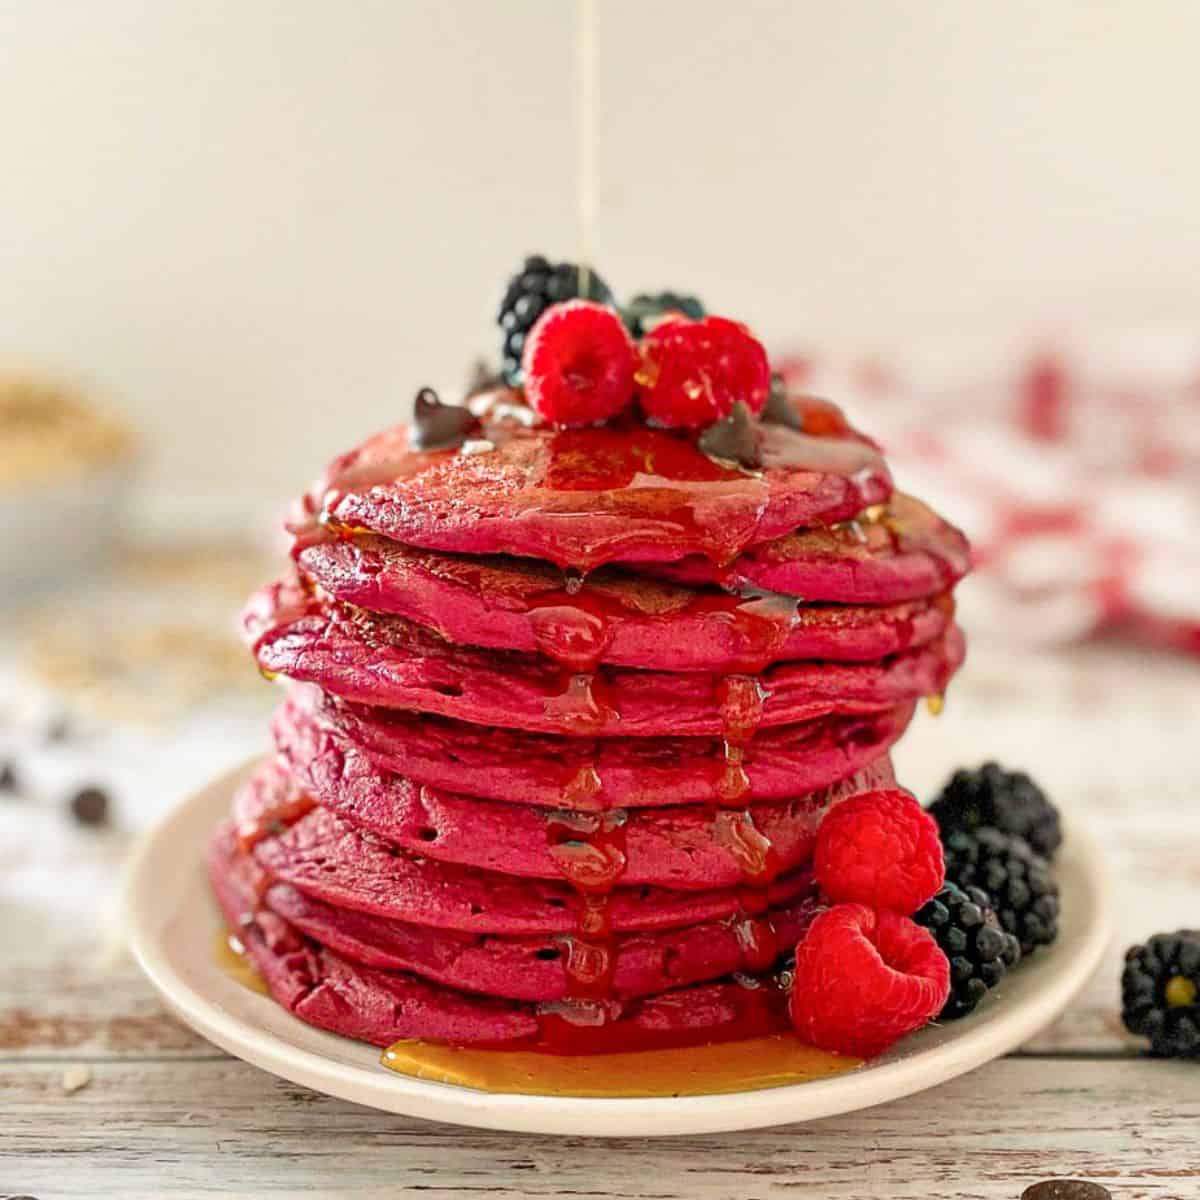 Stack of pink beet pancakes on plate with syrup dripping down the sides.